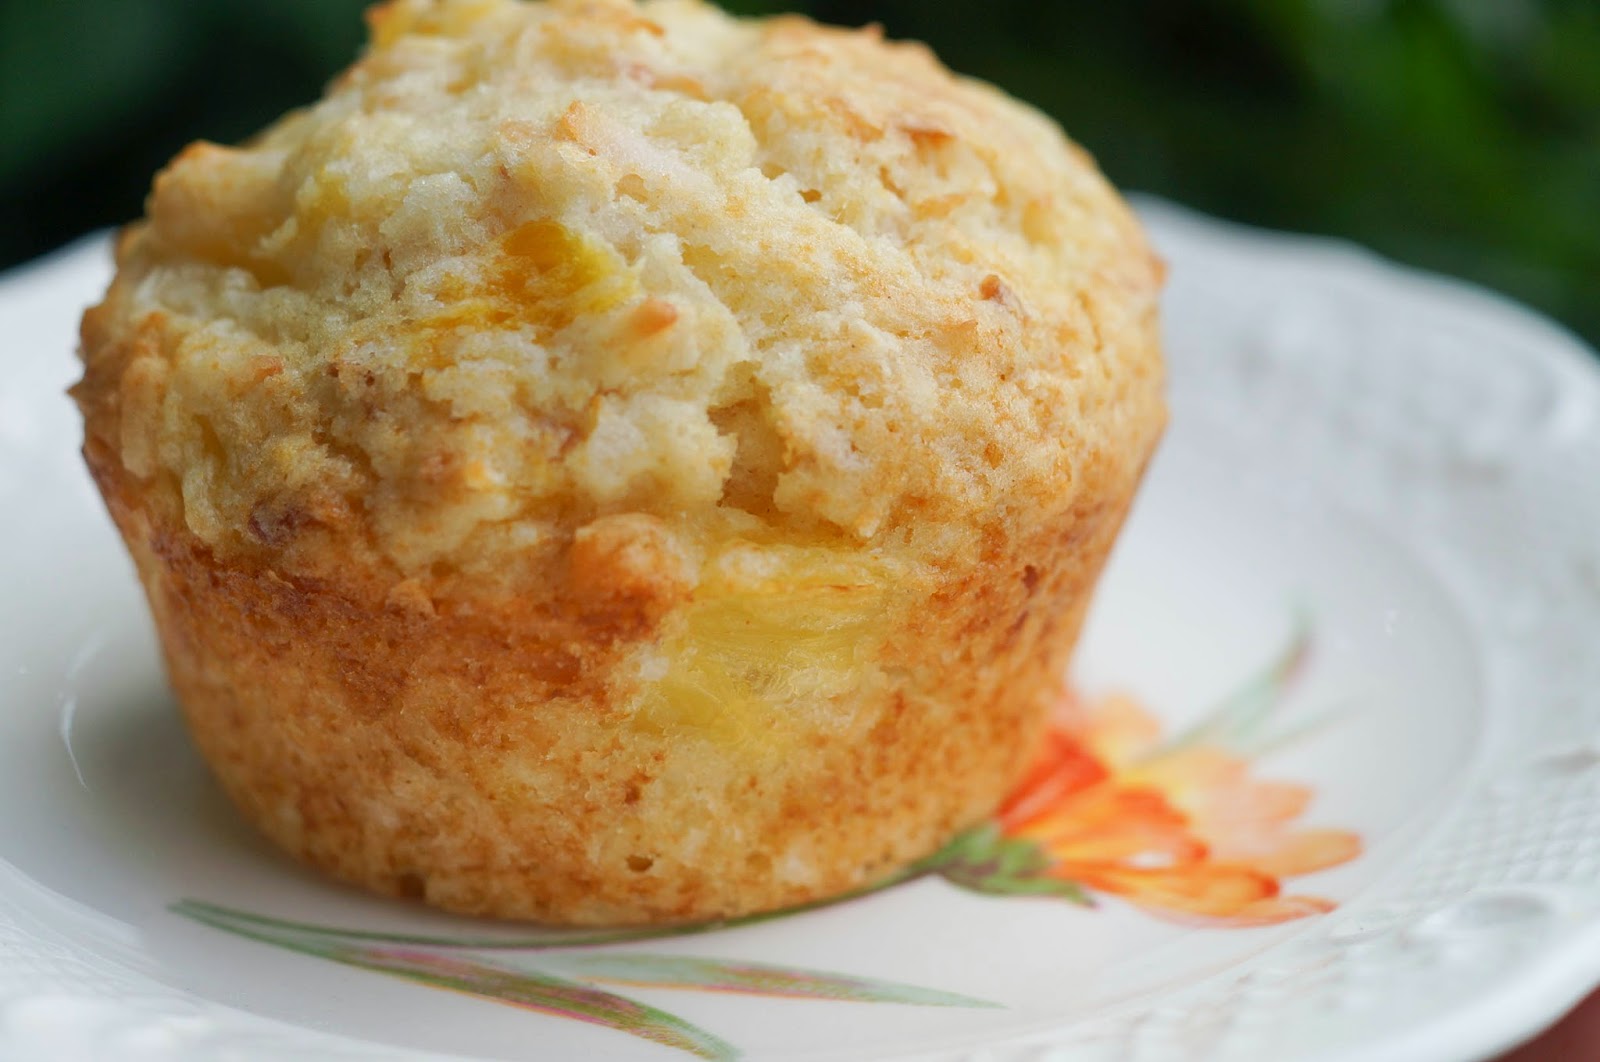 In the Kitchen with Jenny: Piña Colada Muffins